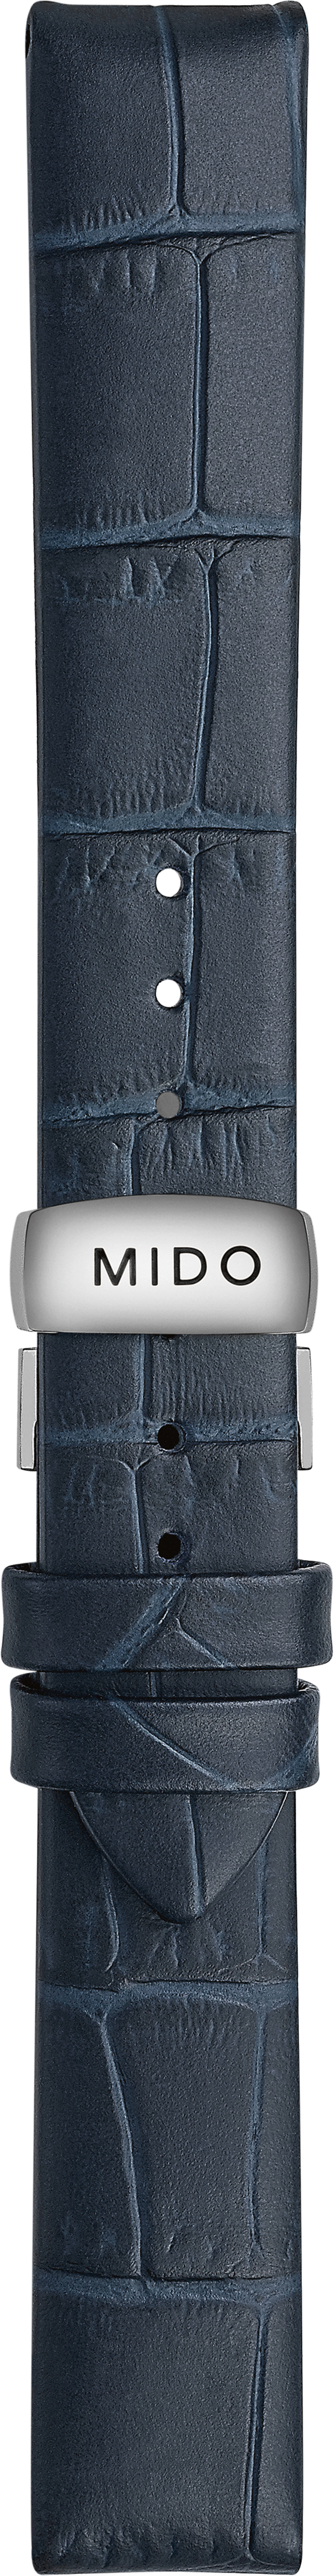 Mido Rainflower blue cowhide leather strap